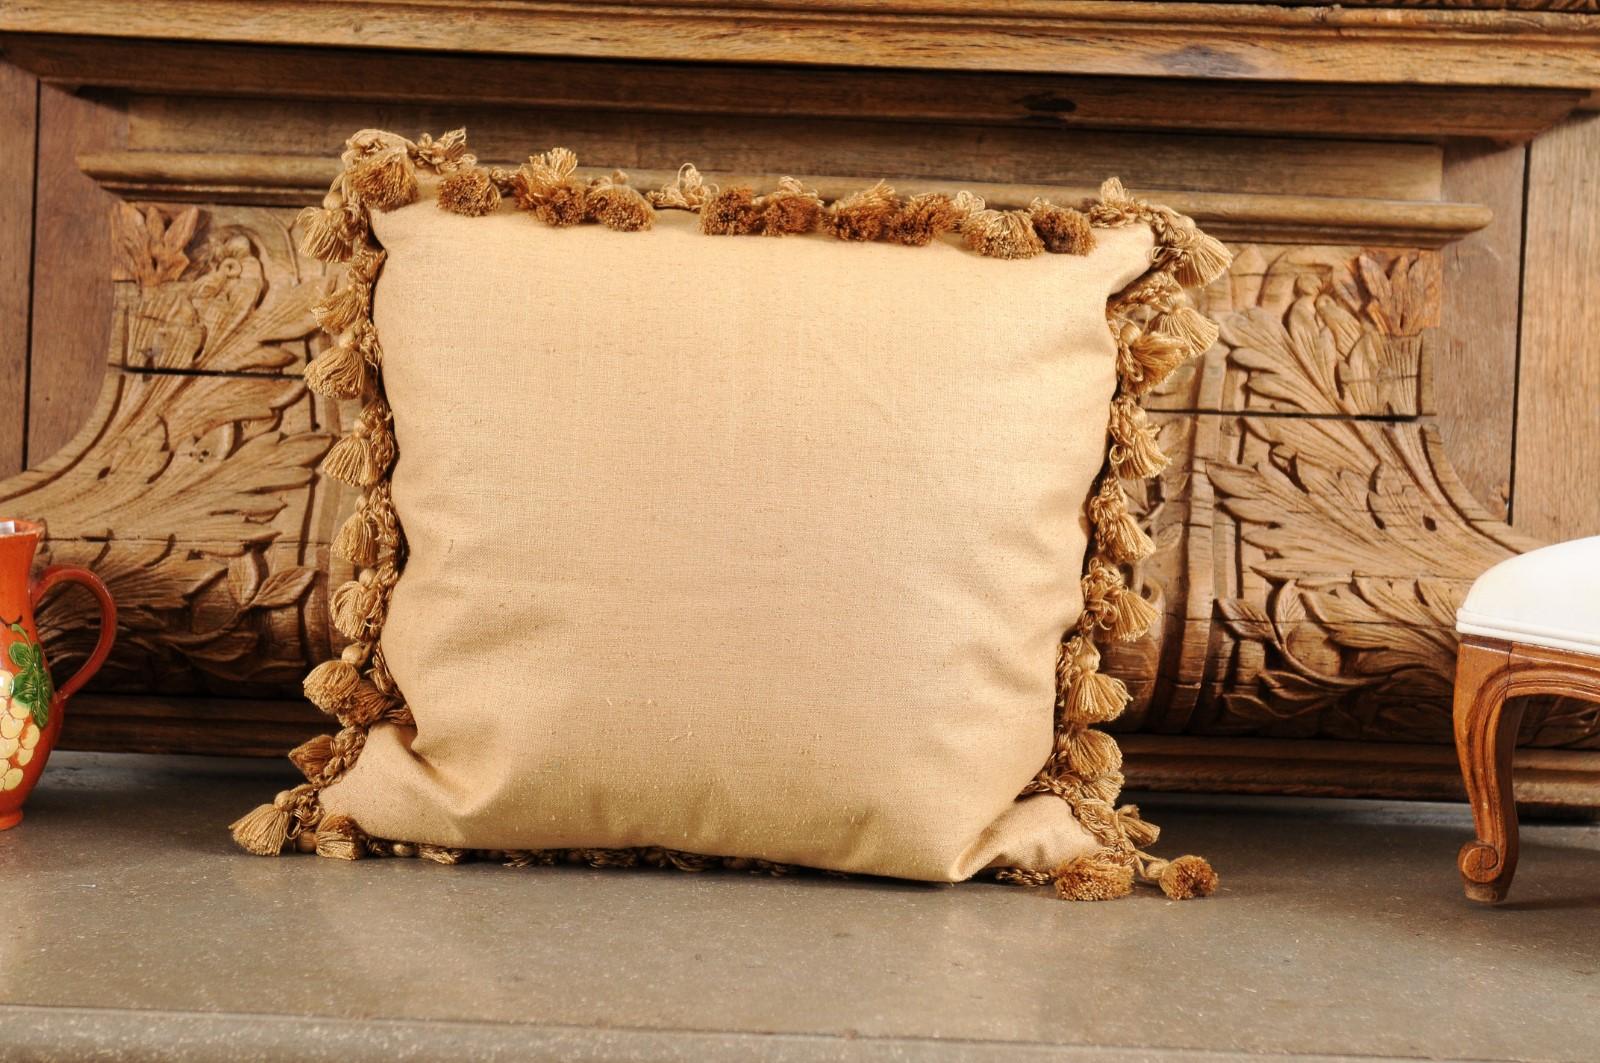 French 19th Century Aubusson Tapestry Pillow with Floral Decor and Tassels For Sale 2